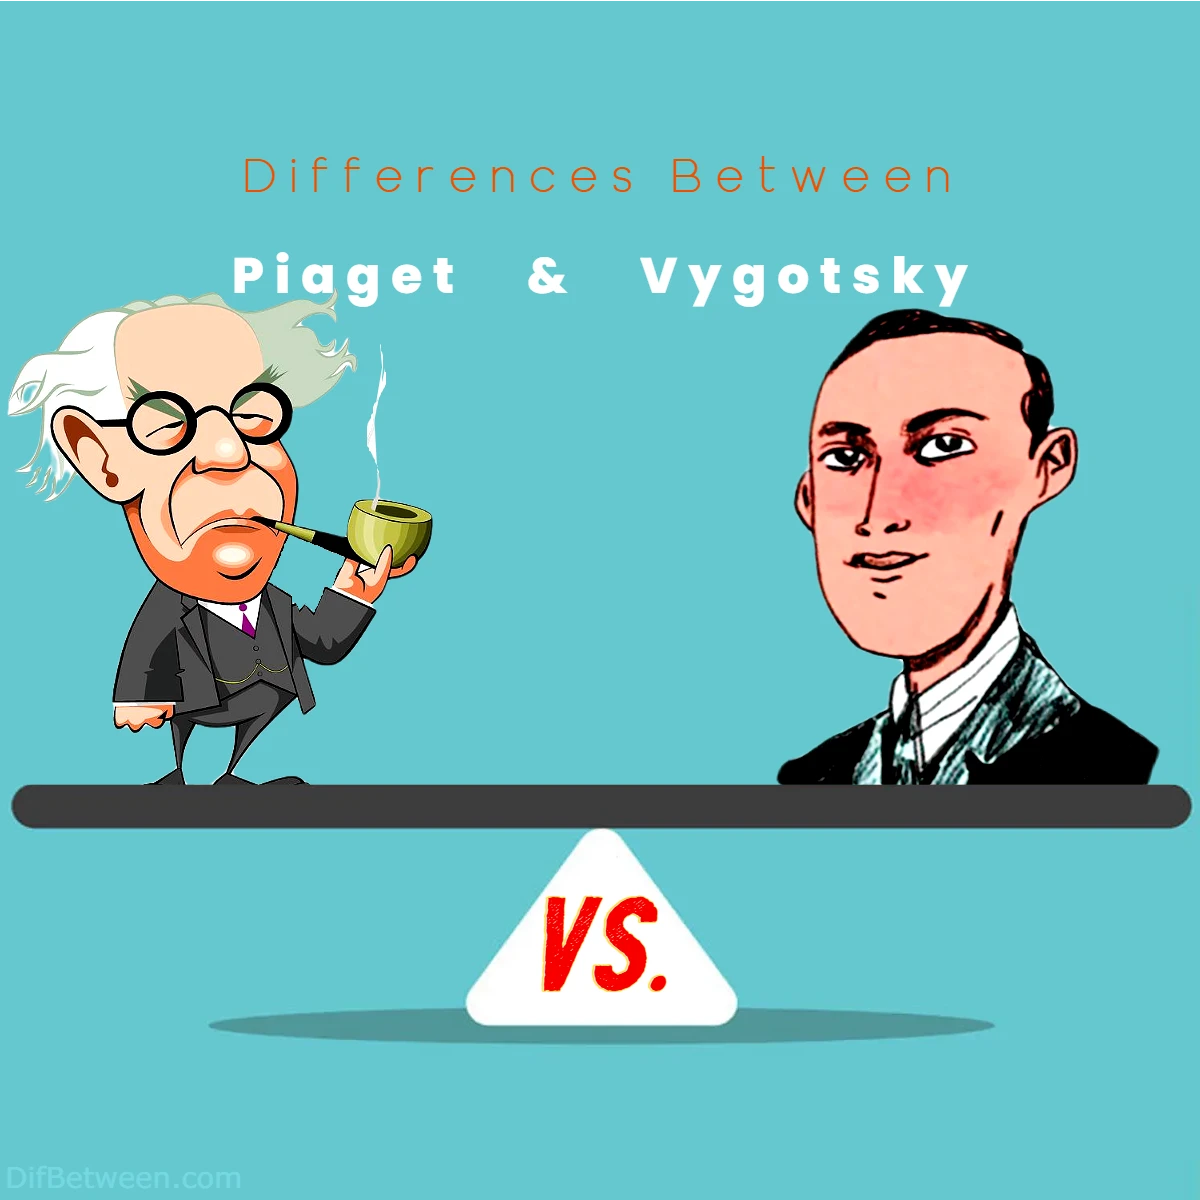 Differences Between Piaget vs Vygotsky